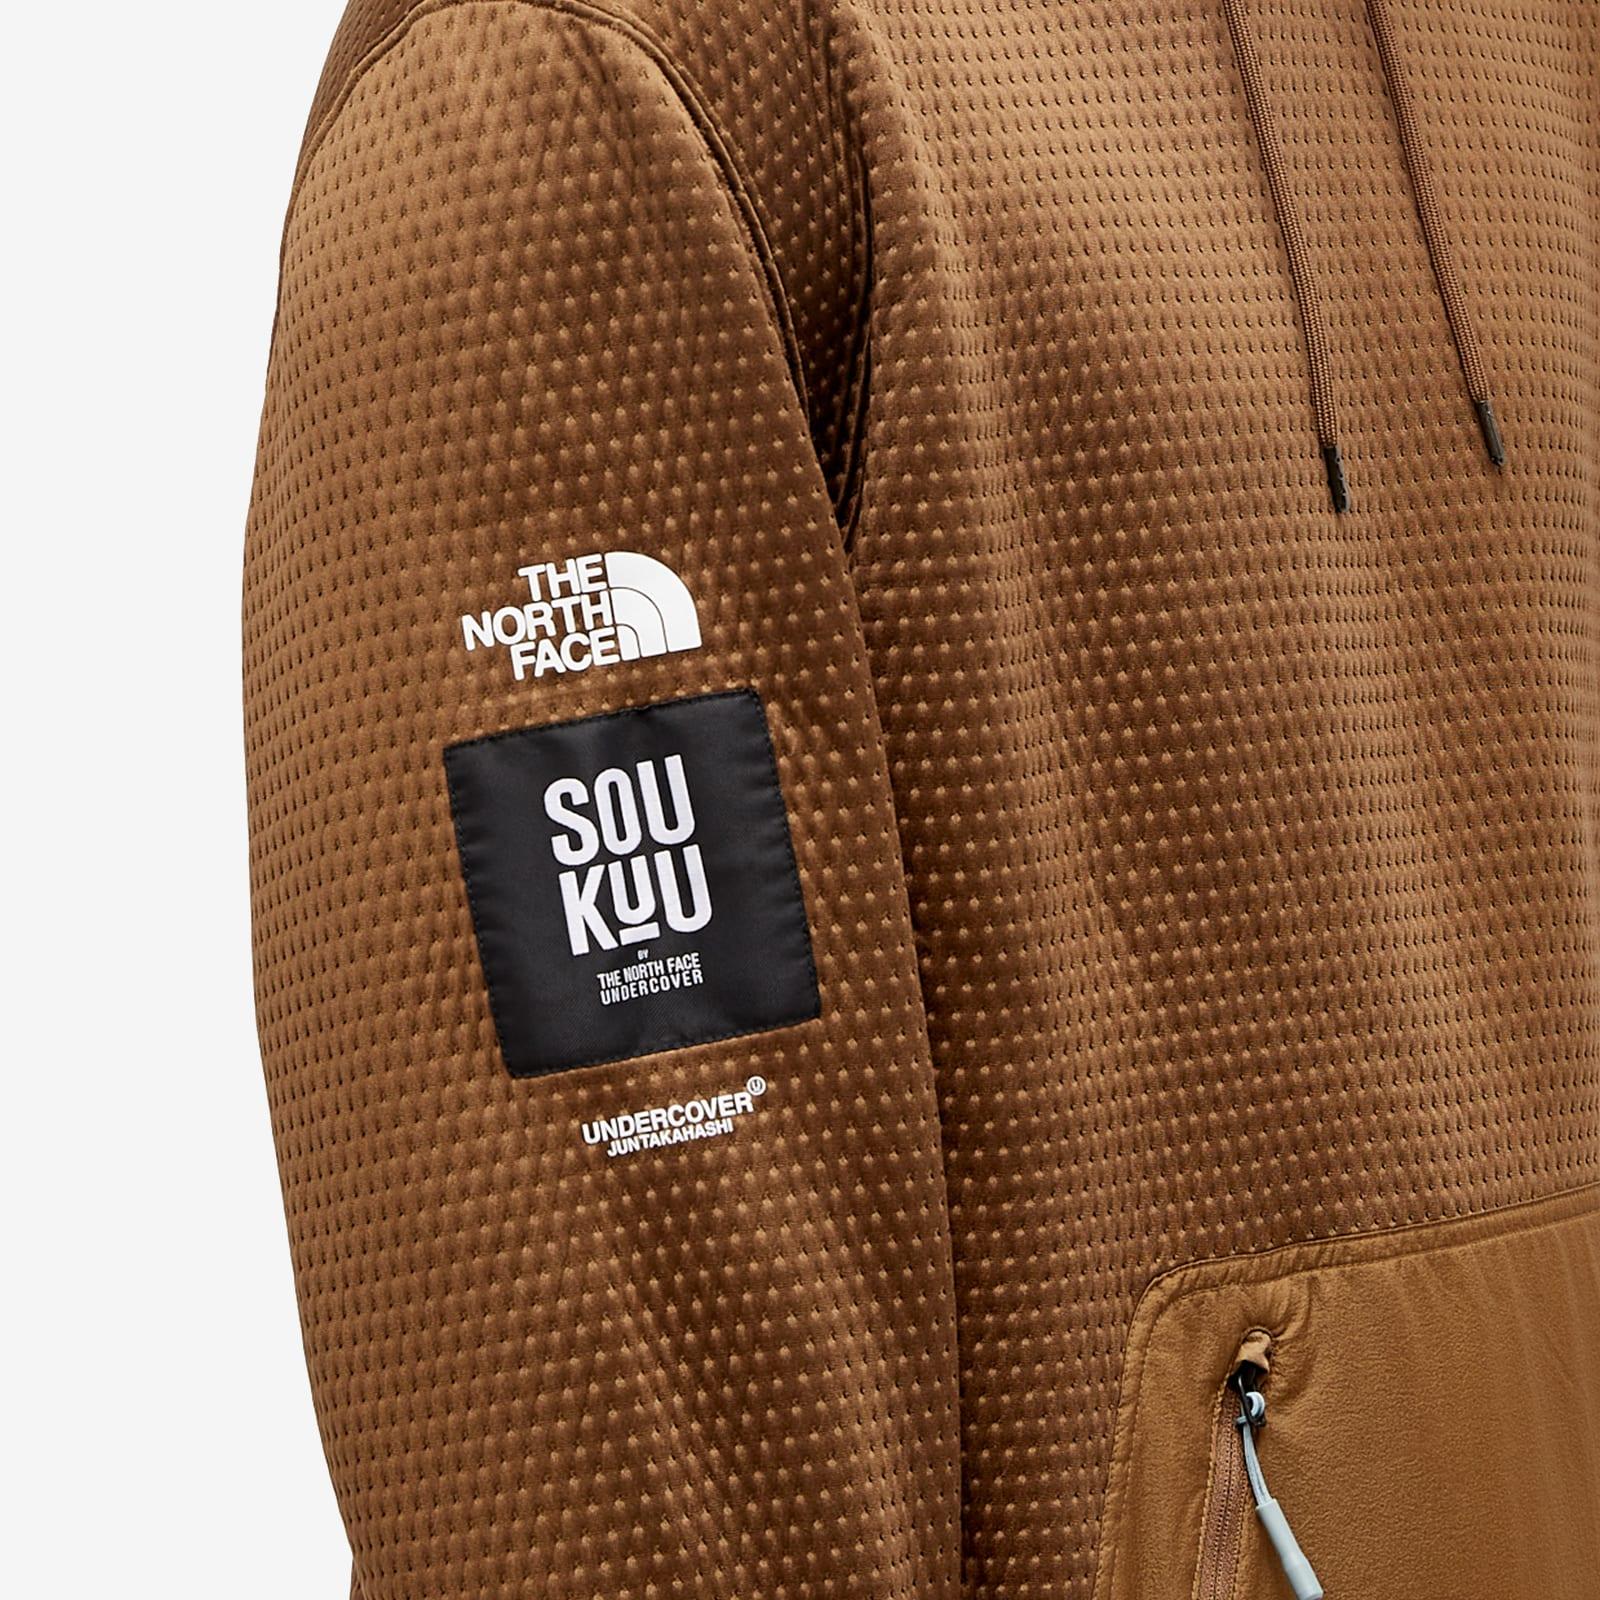 The North Face X Undercover Soukuu Dot Knit Double Hoodie in Brown